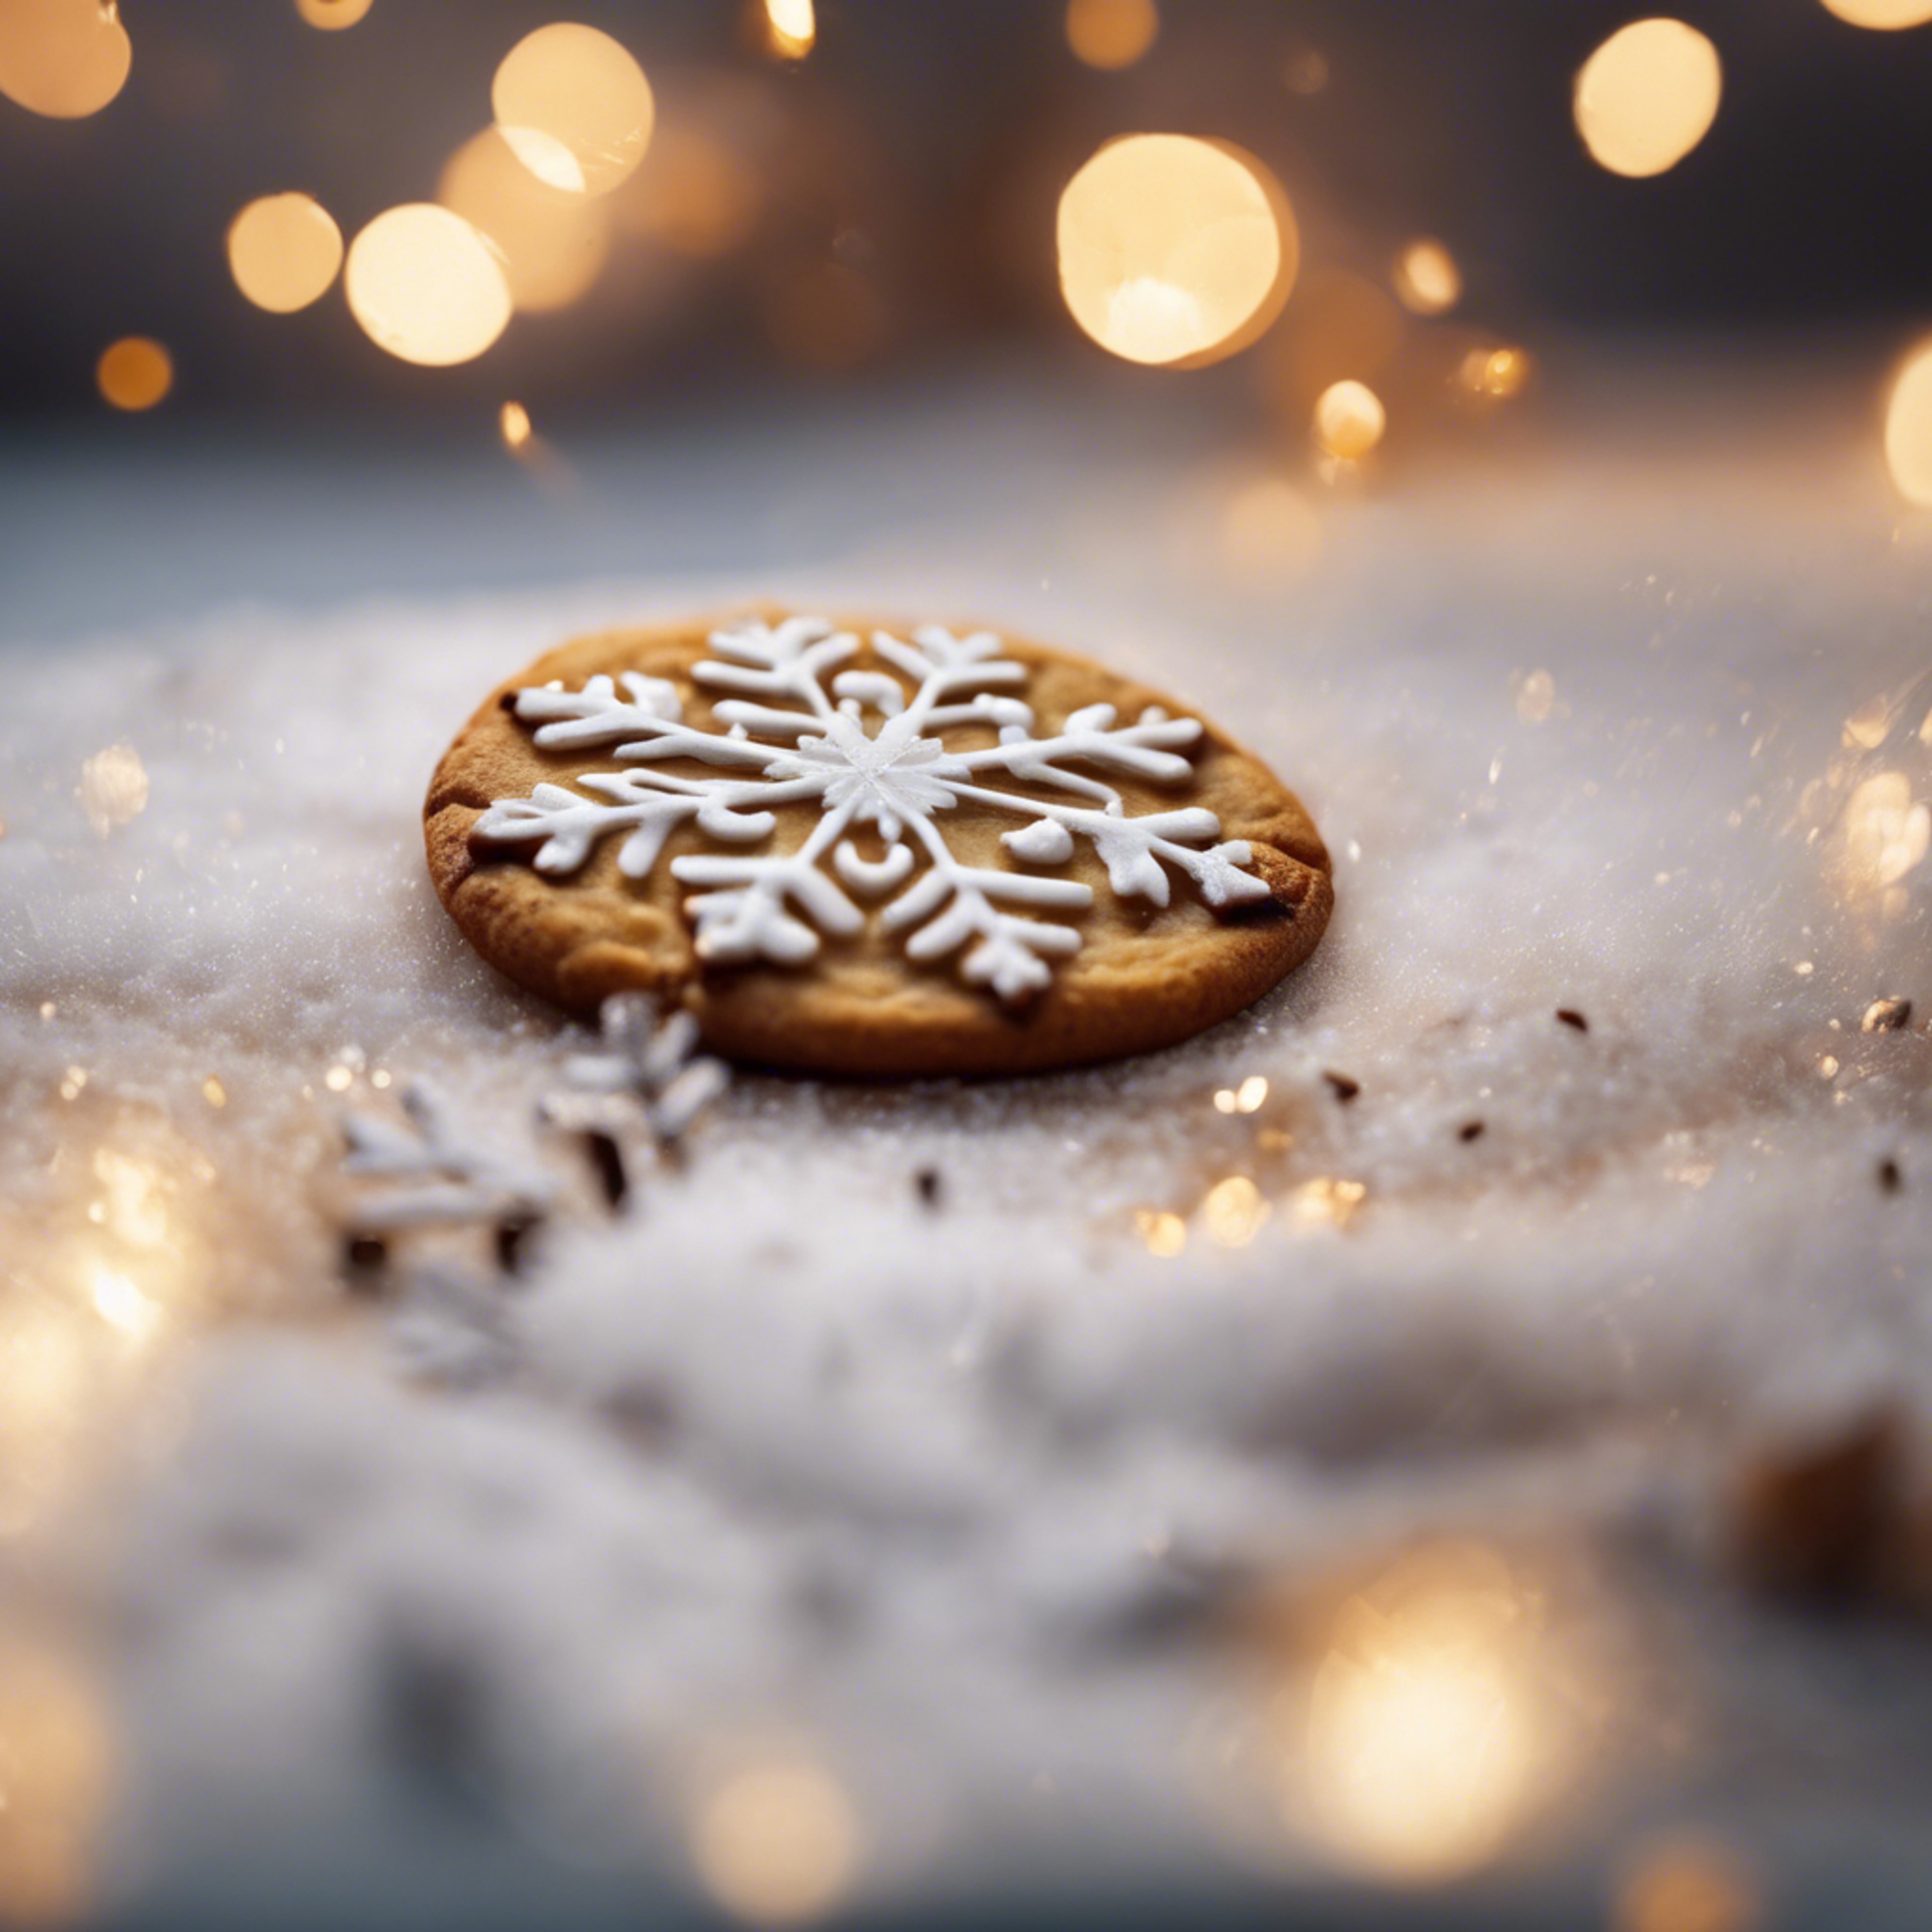 A freshly baked warm cookie with a snowflake landing on it. Обои[89e6bcadefb047bd9a34]